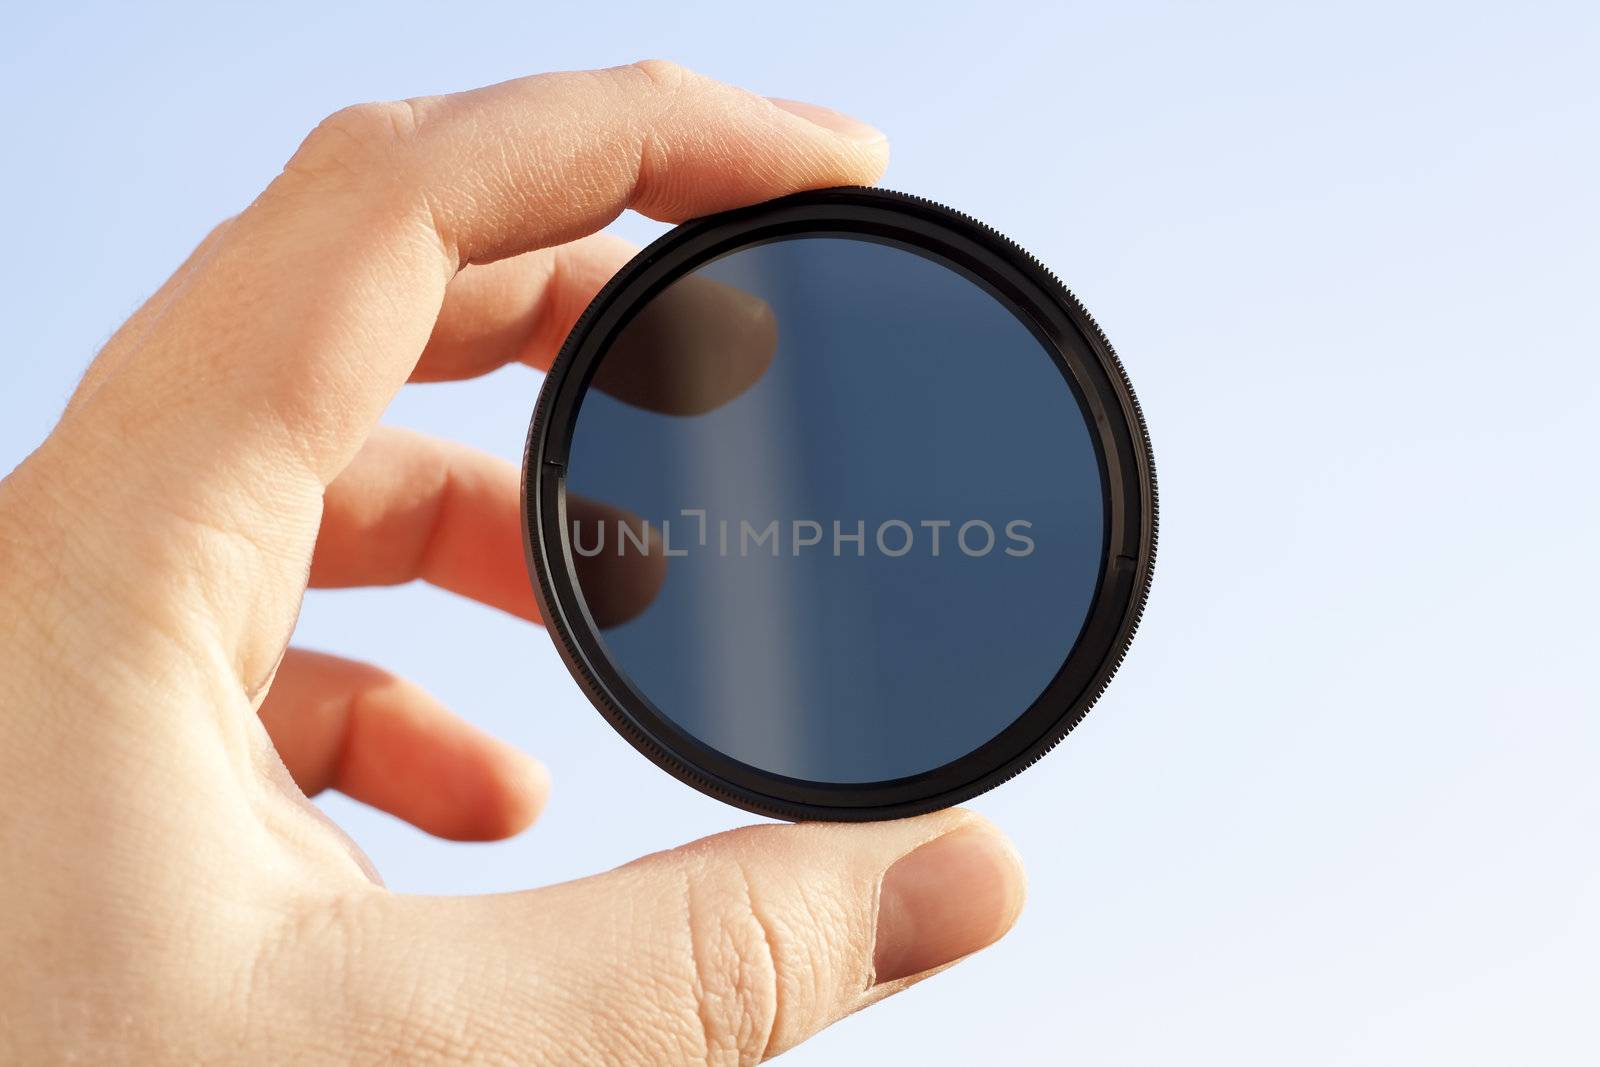 Man's hand holds a ND (neutral density) optical filter against sky